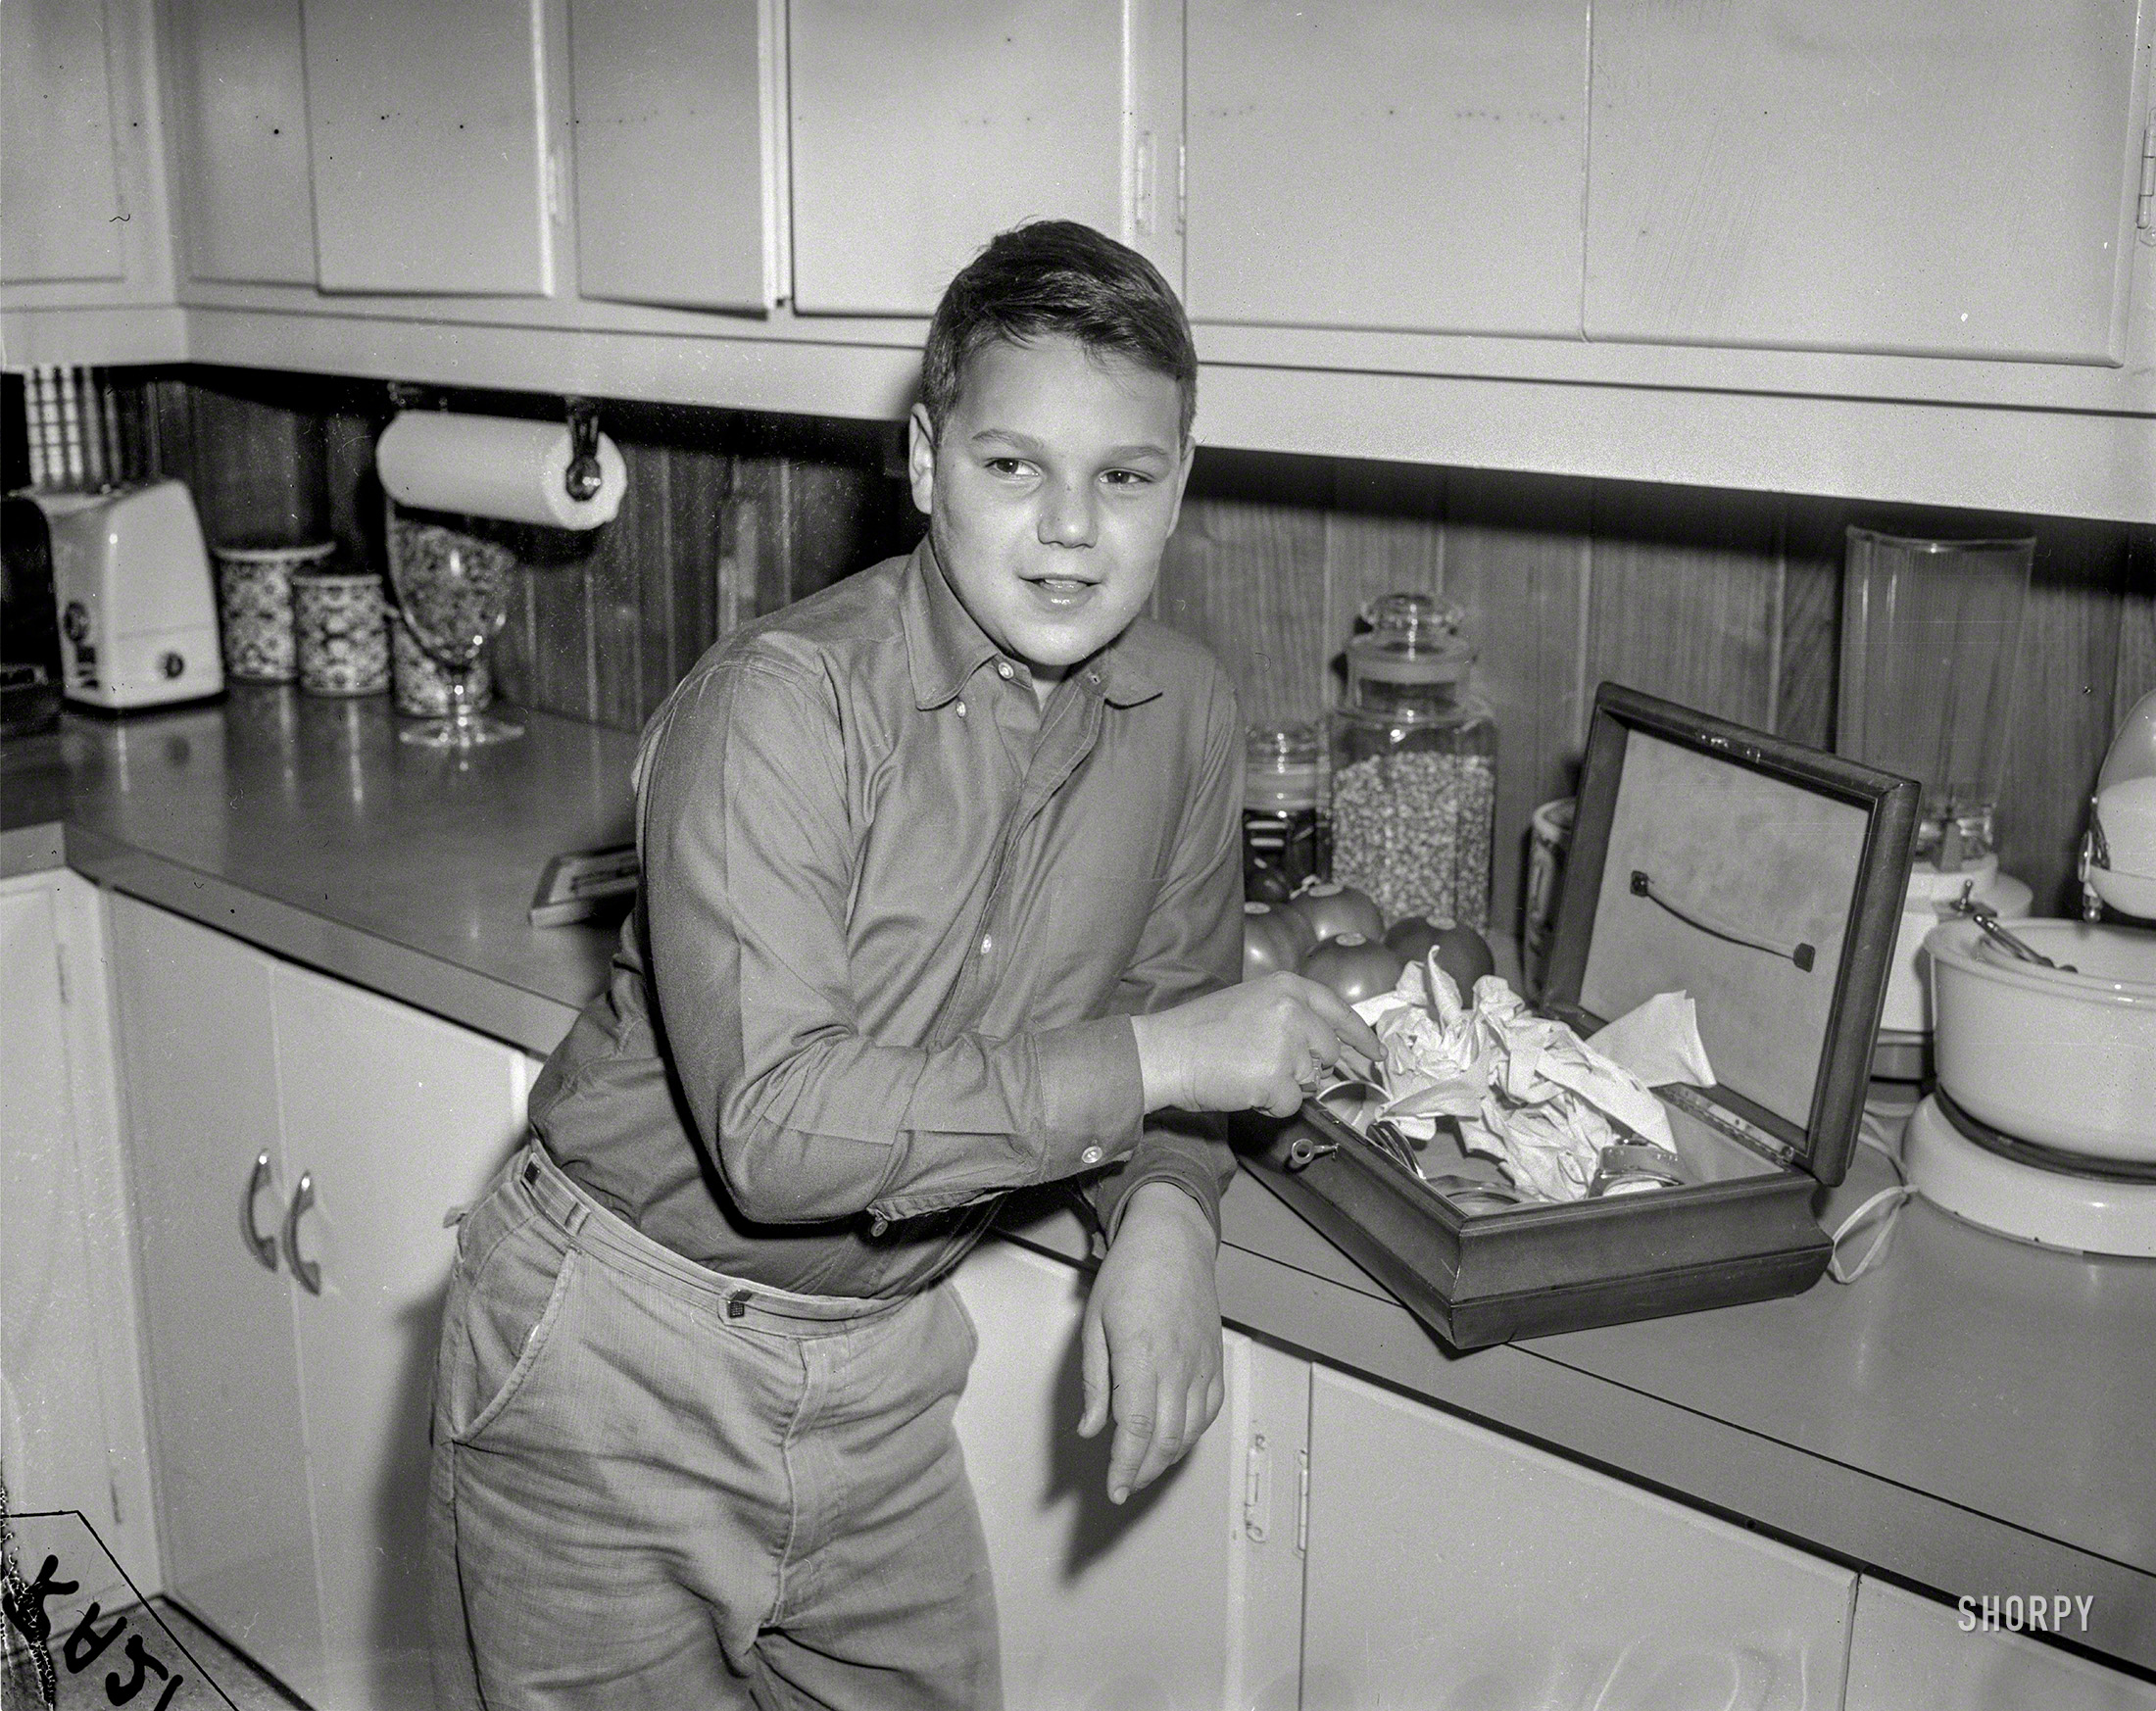 Chicago circa 1958. "Crime" is all it says on this News Archive photo -- a whodunit whose clues are a boy, a kitchen, a box and some handcuffs. View full size.